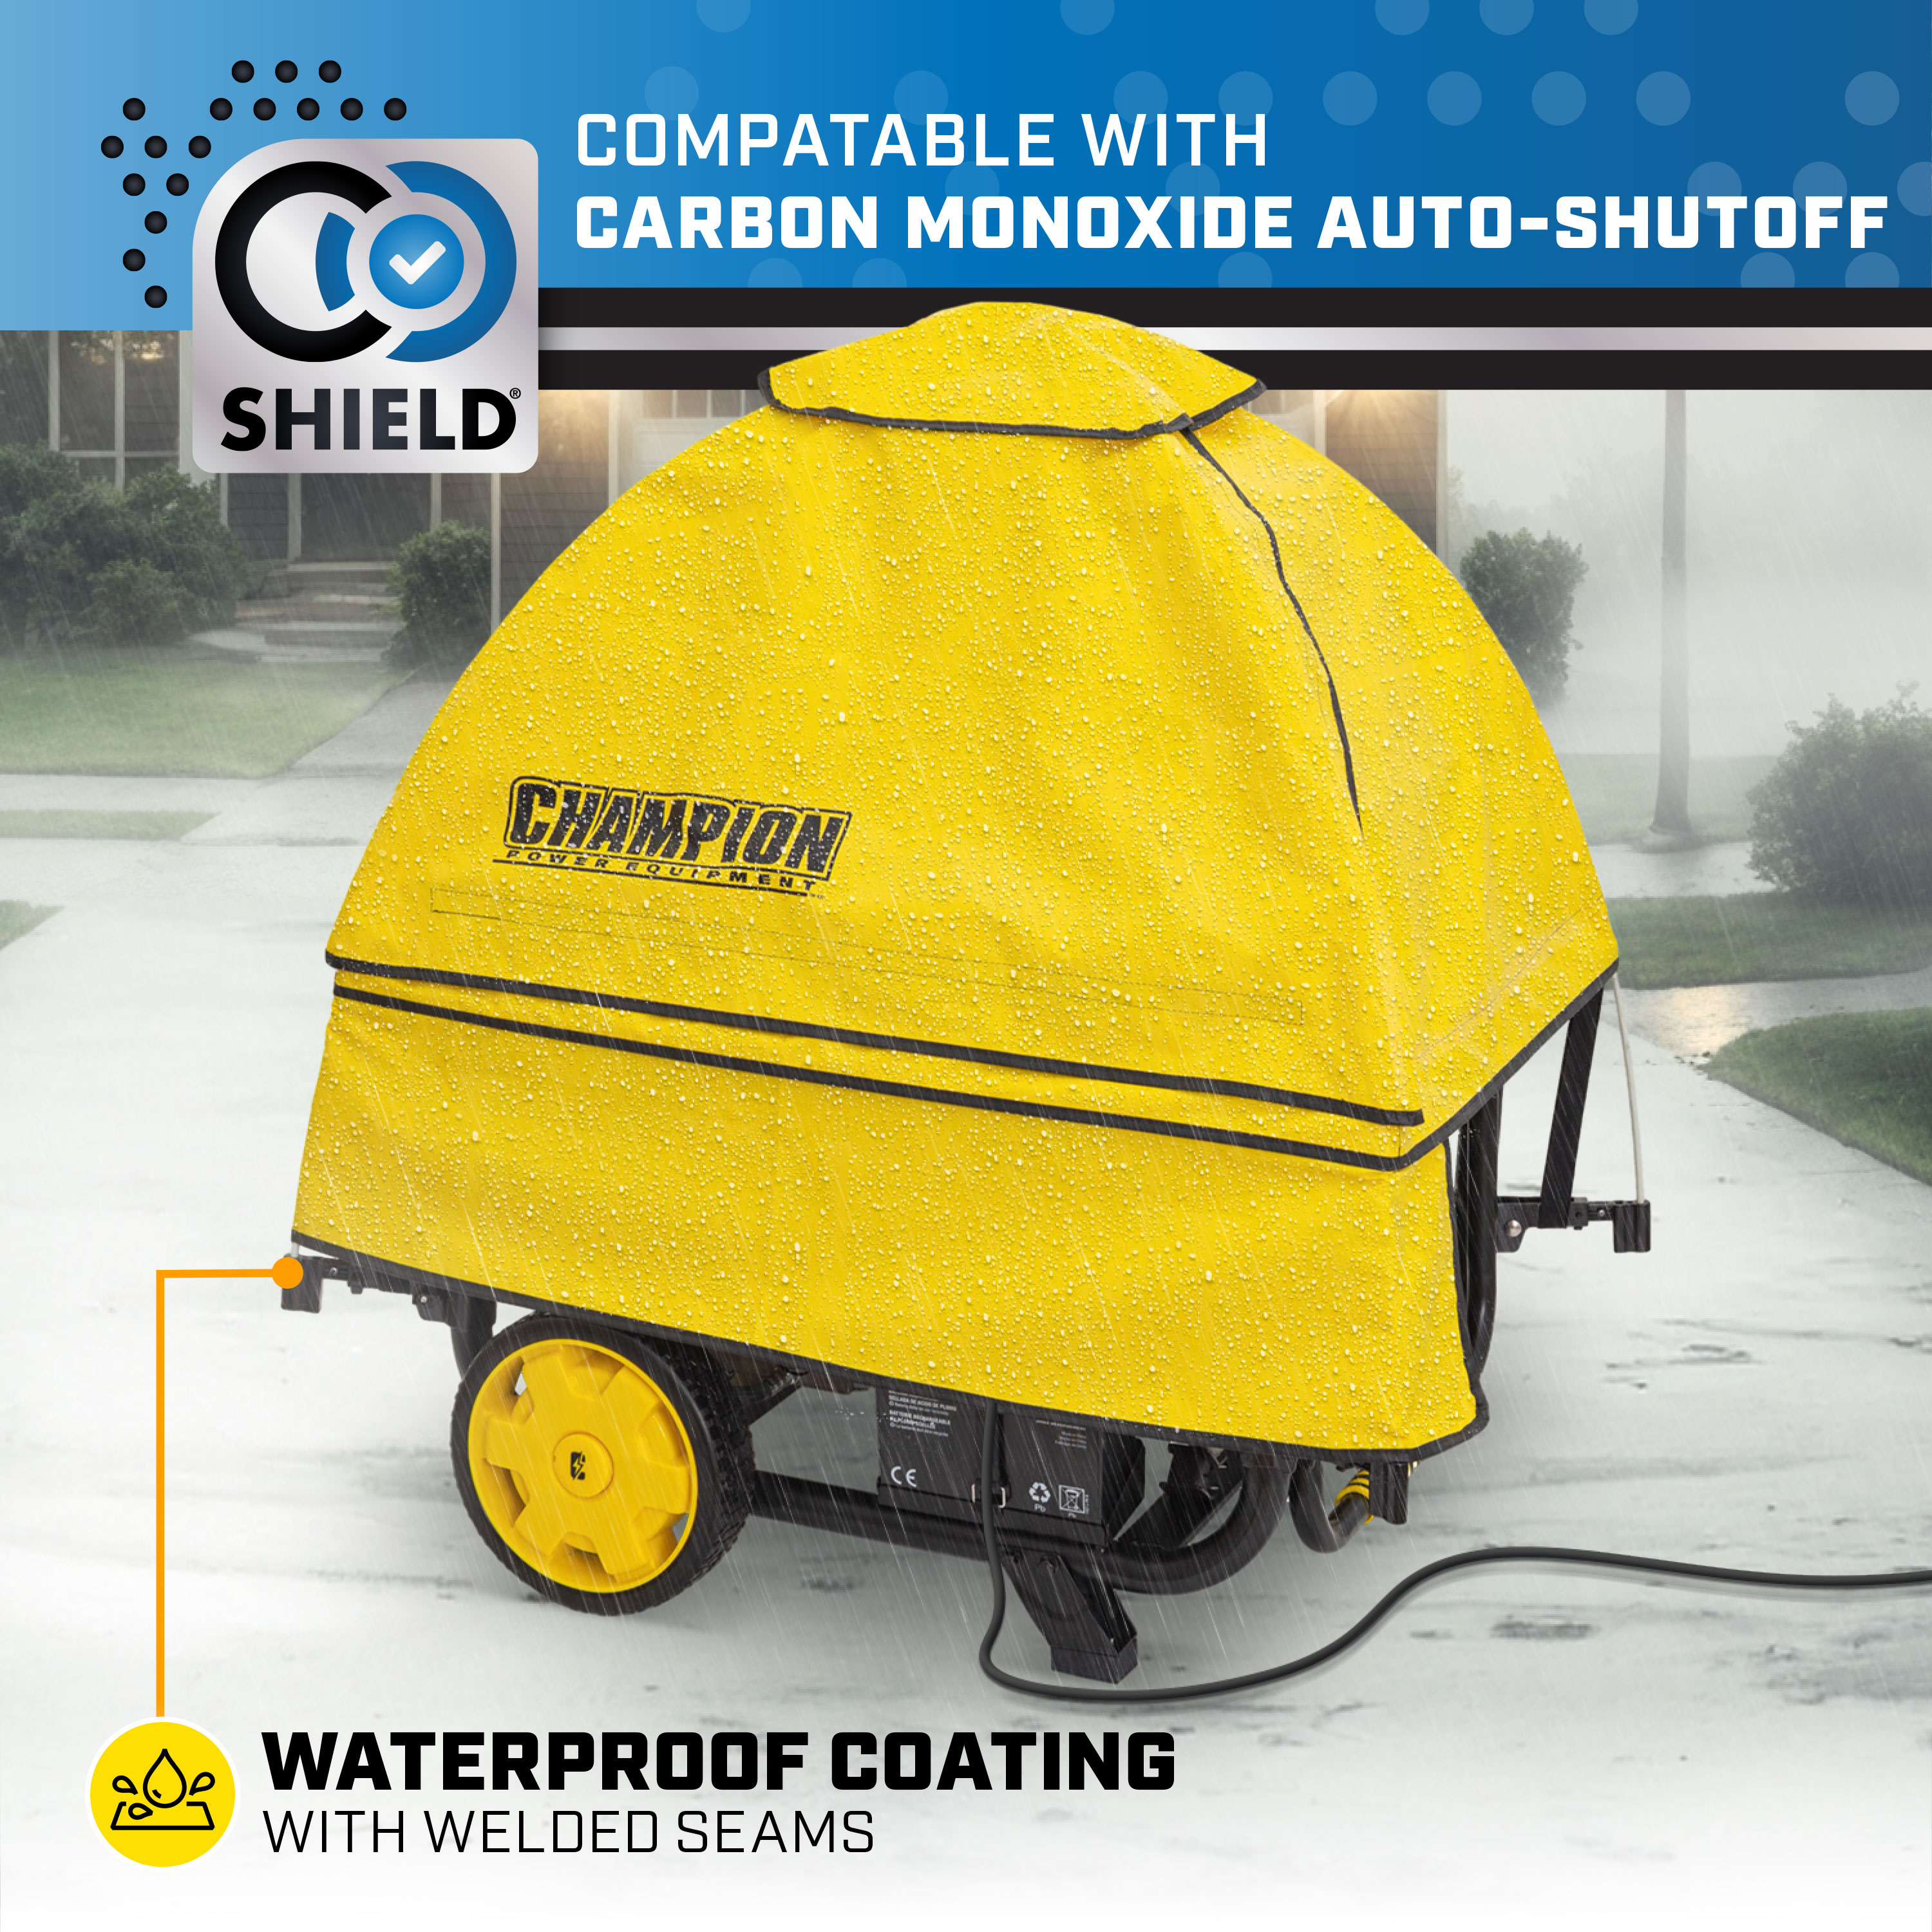 Champion Power Equipment Storm Shield Severe Weather Generator Cover by Gentent for 4000 to 12,500 Starting Watt Generators - image 6 of 13